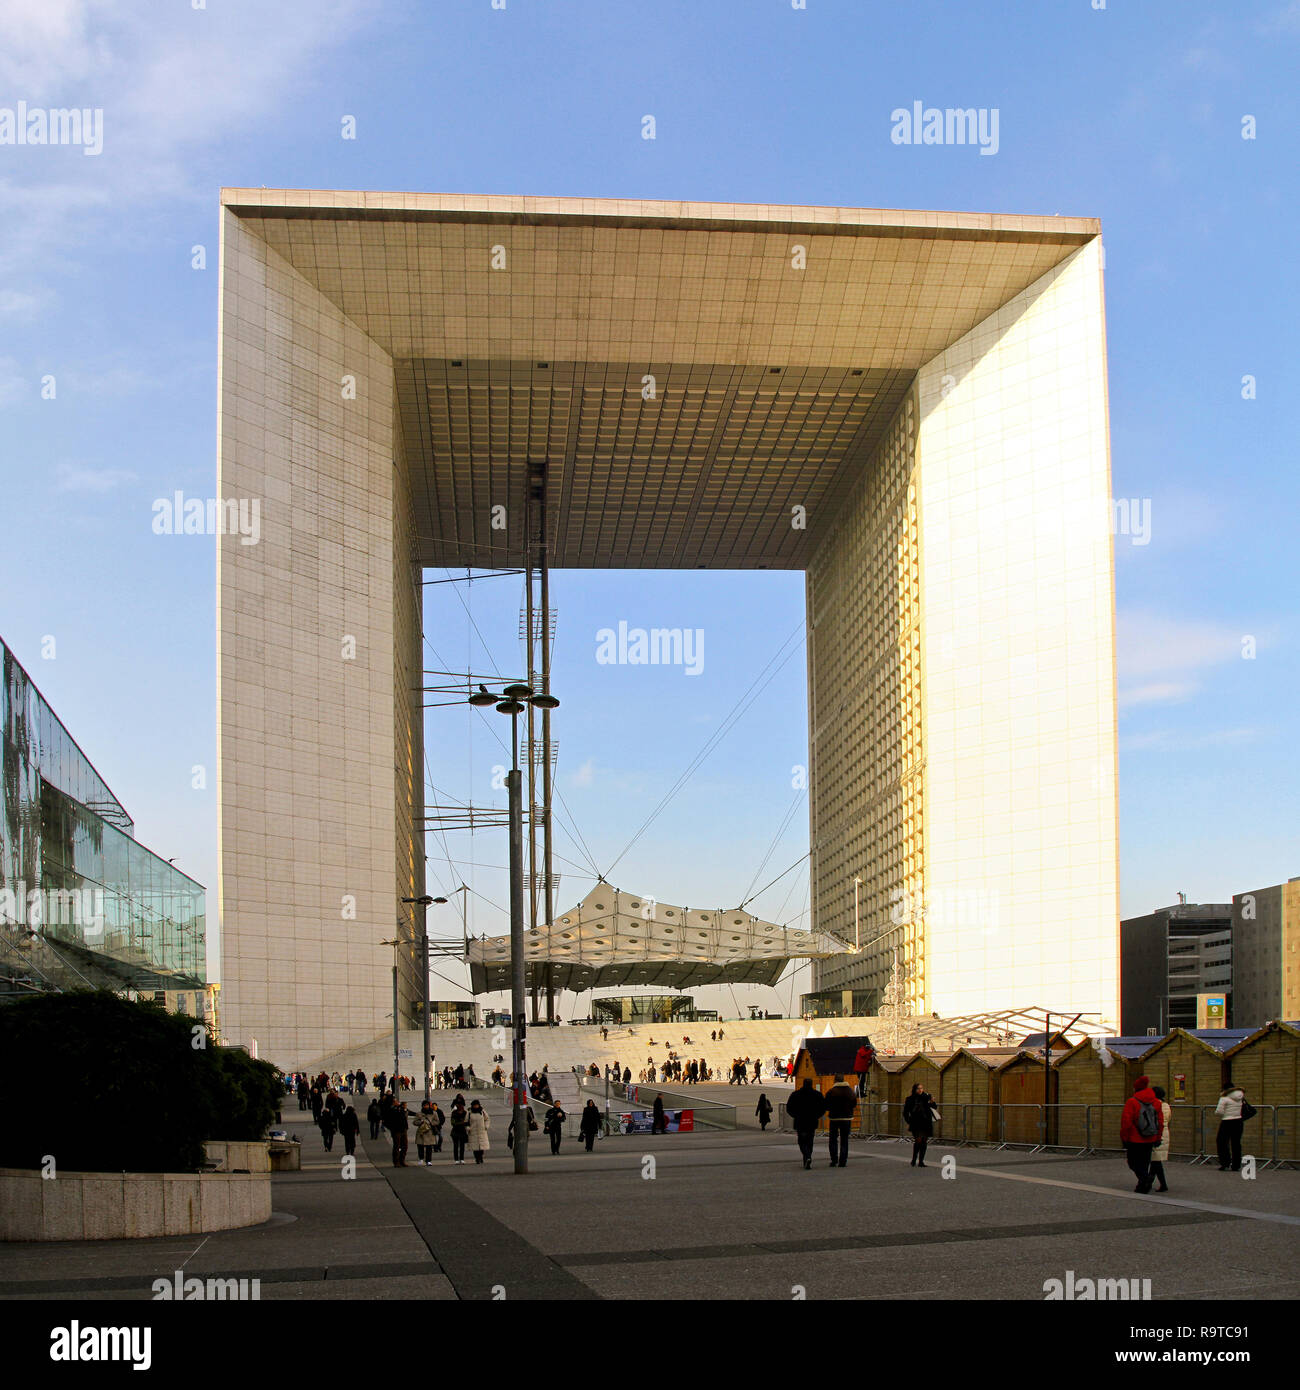 PARIS, FRANCE - JANUARY 5: Grande Arche in Paris on JANUARY 5, 2010. Grande Arche from the plaza at La Defense business district in Paris, France. Stock Photo